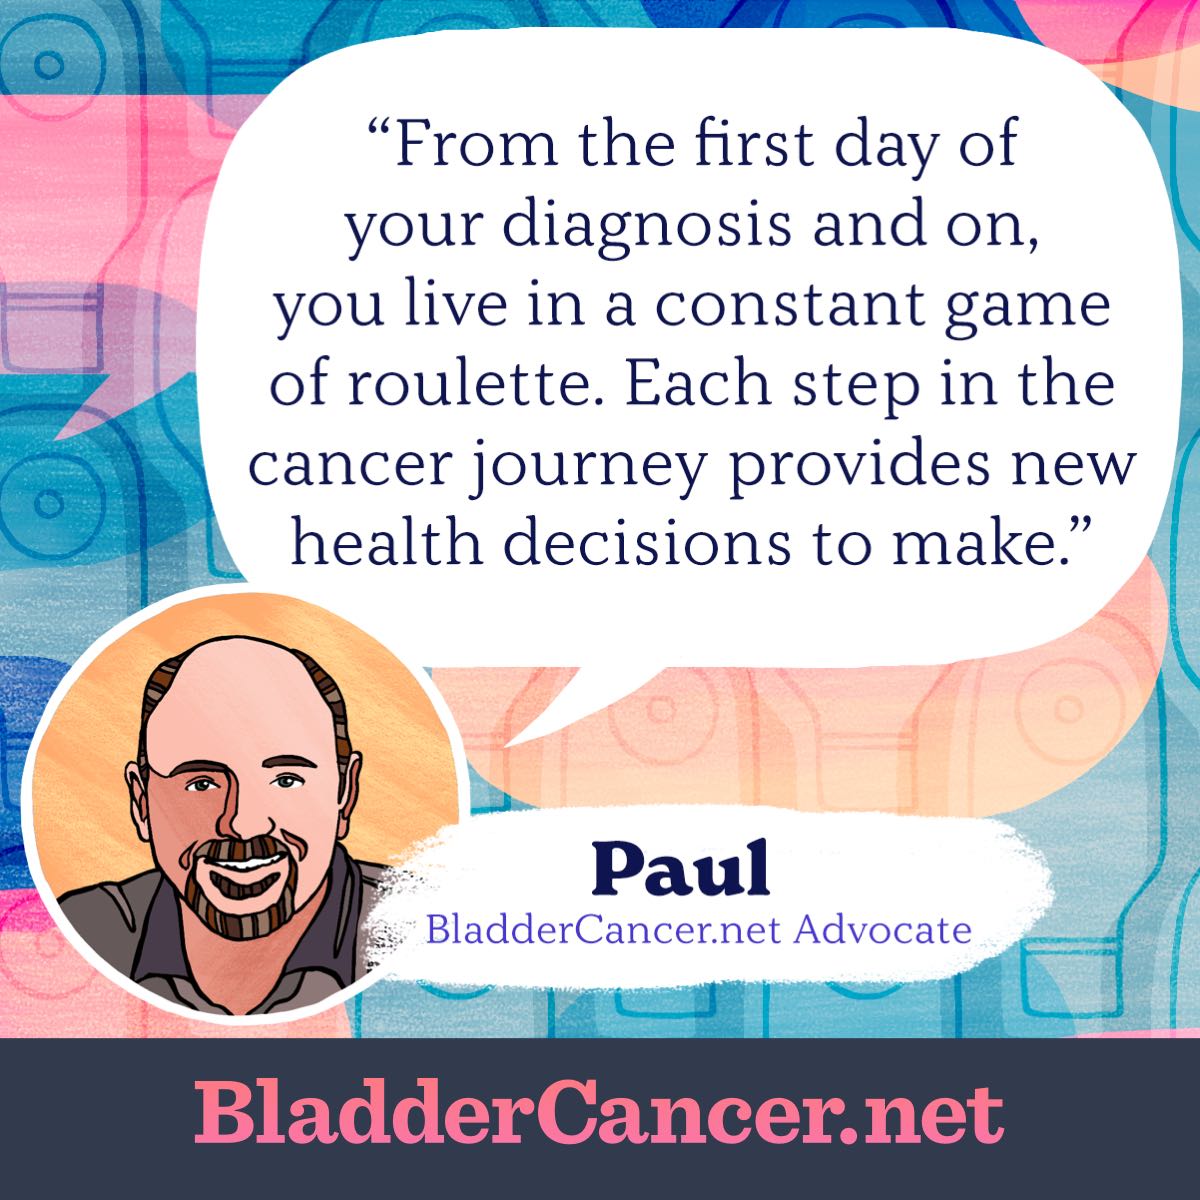 From the first day of your diagnosis and on, you live in a constant game of roulette. Each step in the cancer journey provides new health decisions to make. -Paul, BladderCancer.net Advocate